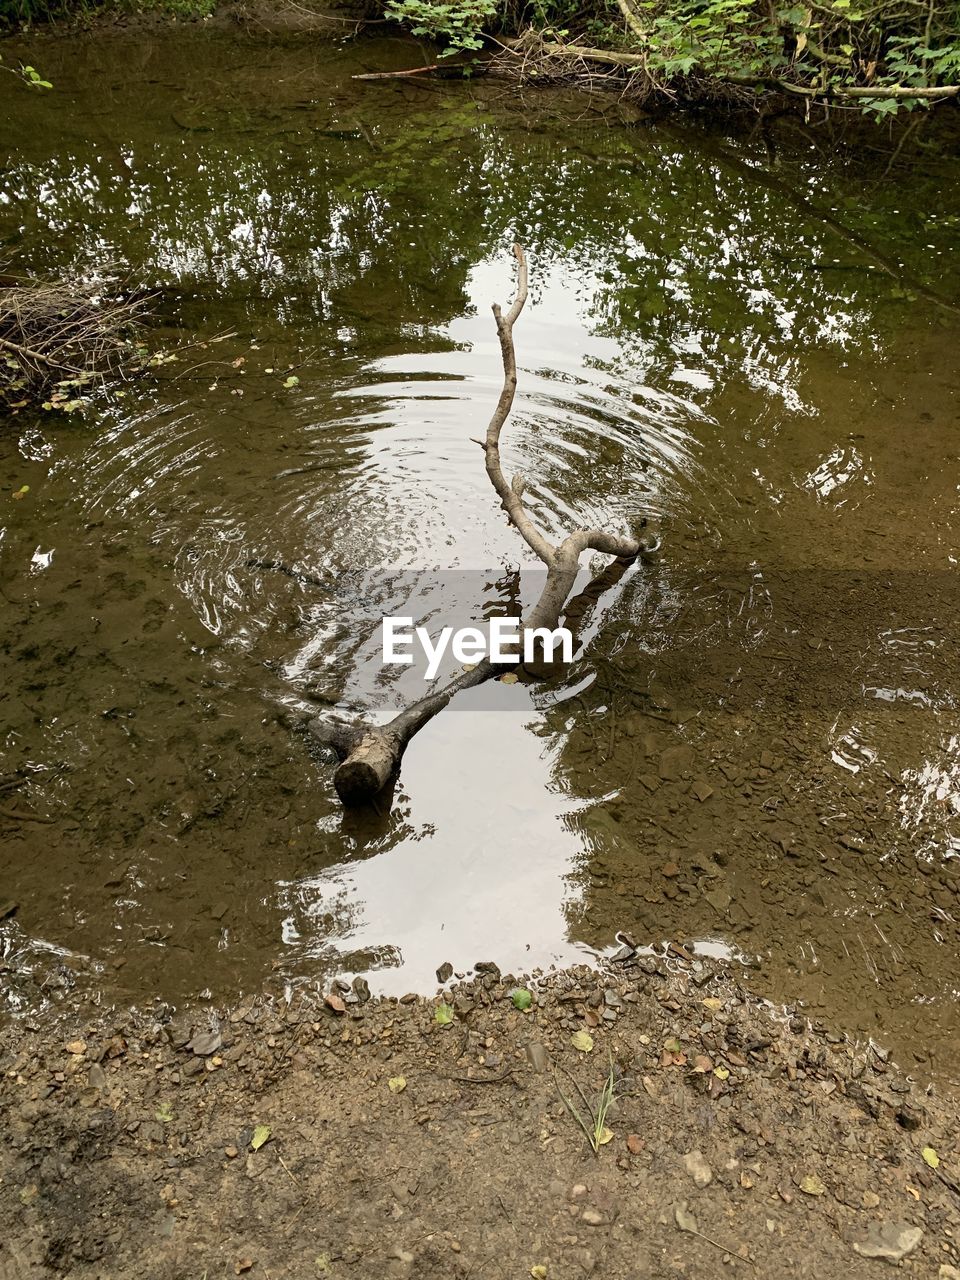 HIGH ANGLE VIEW OF A BIRD IN WATER